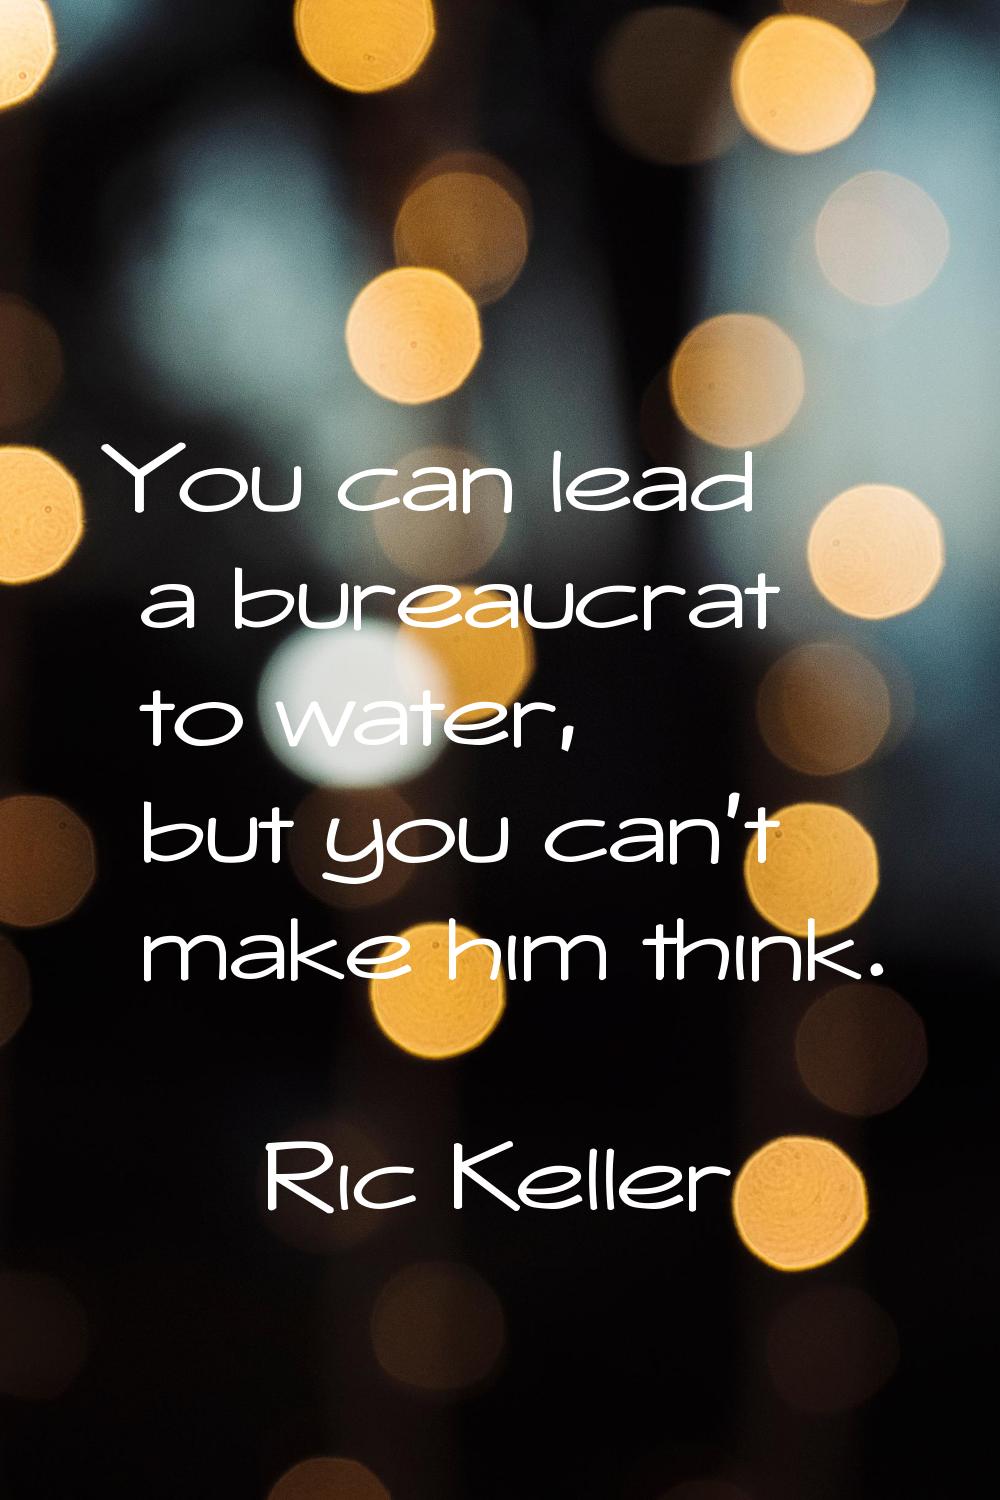 You can lead a bureaucrat to water, but you can't make him think.